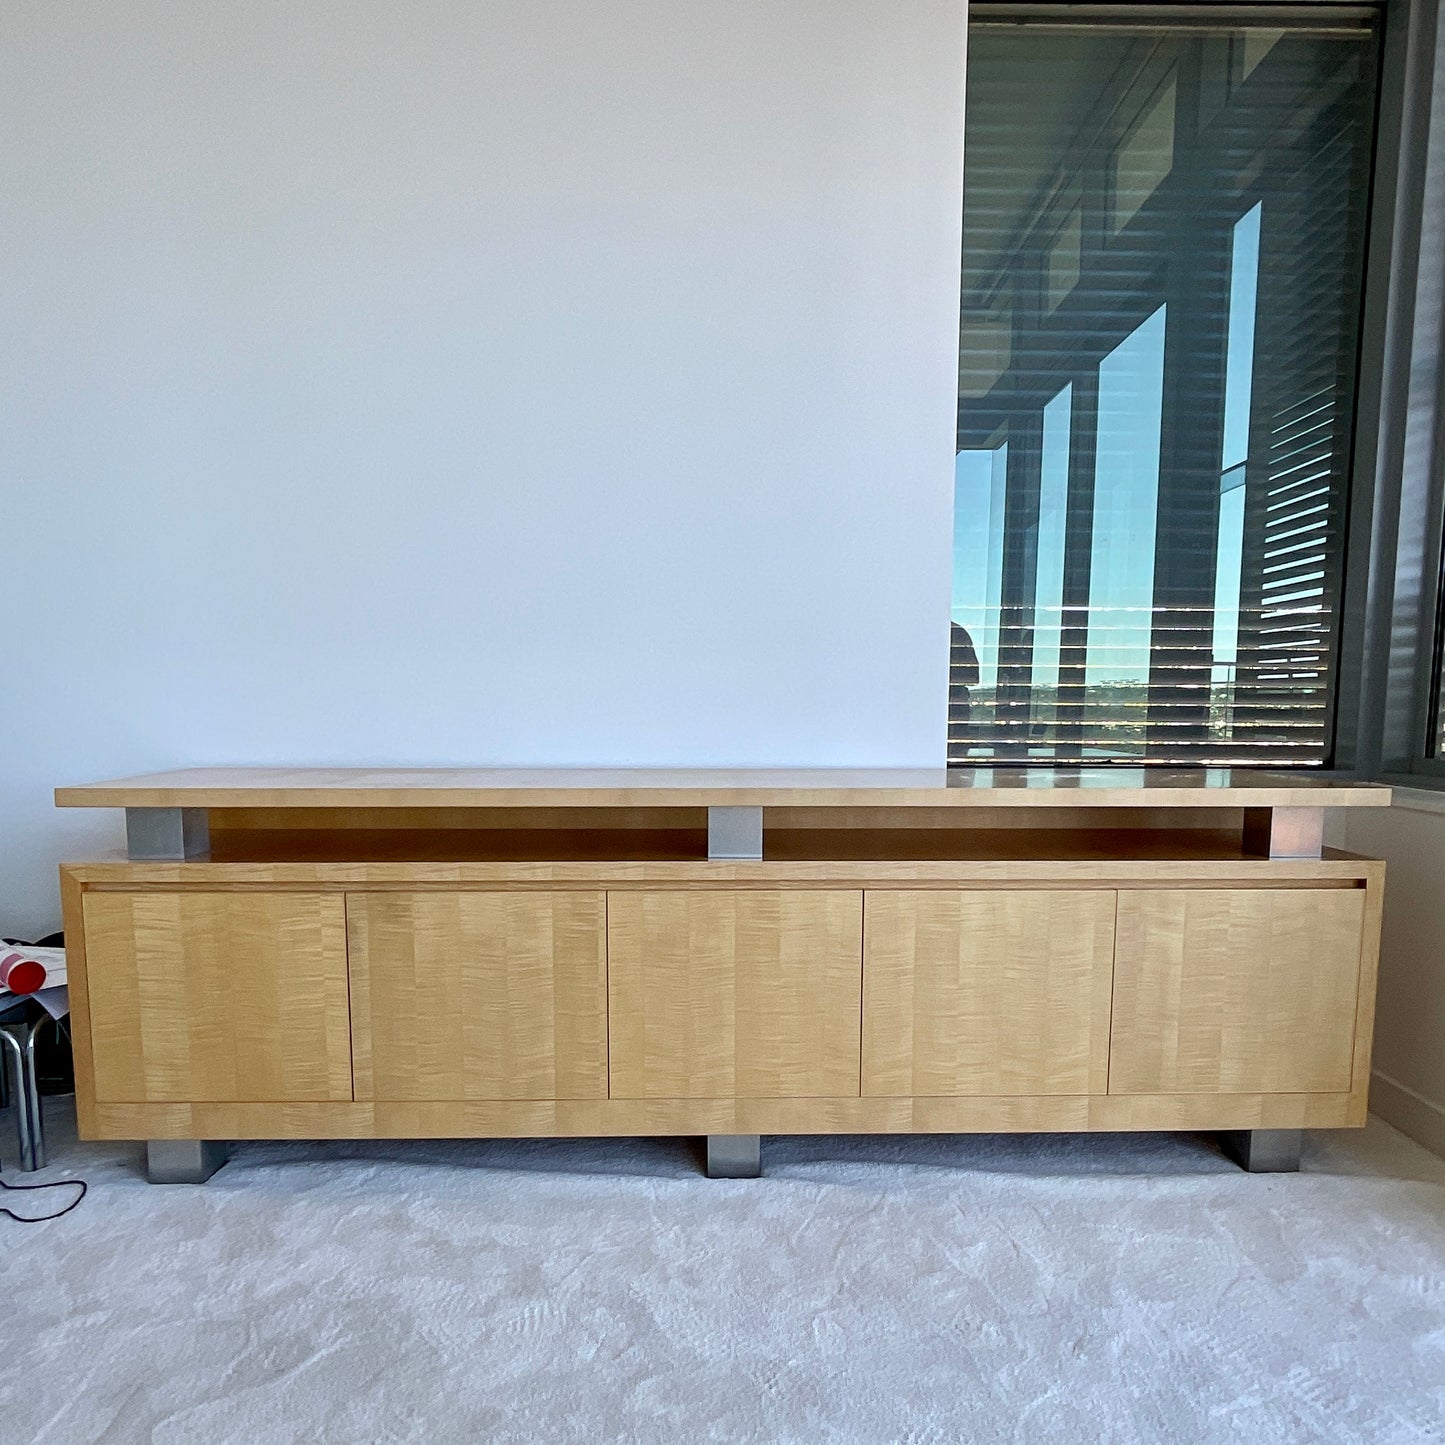 Load image into Gallery viewer, Custom Credenza by James Salmond
